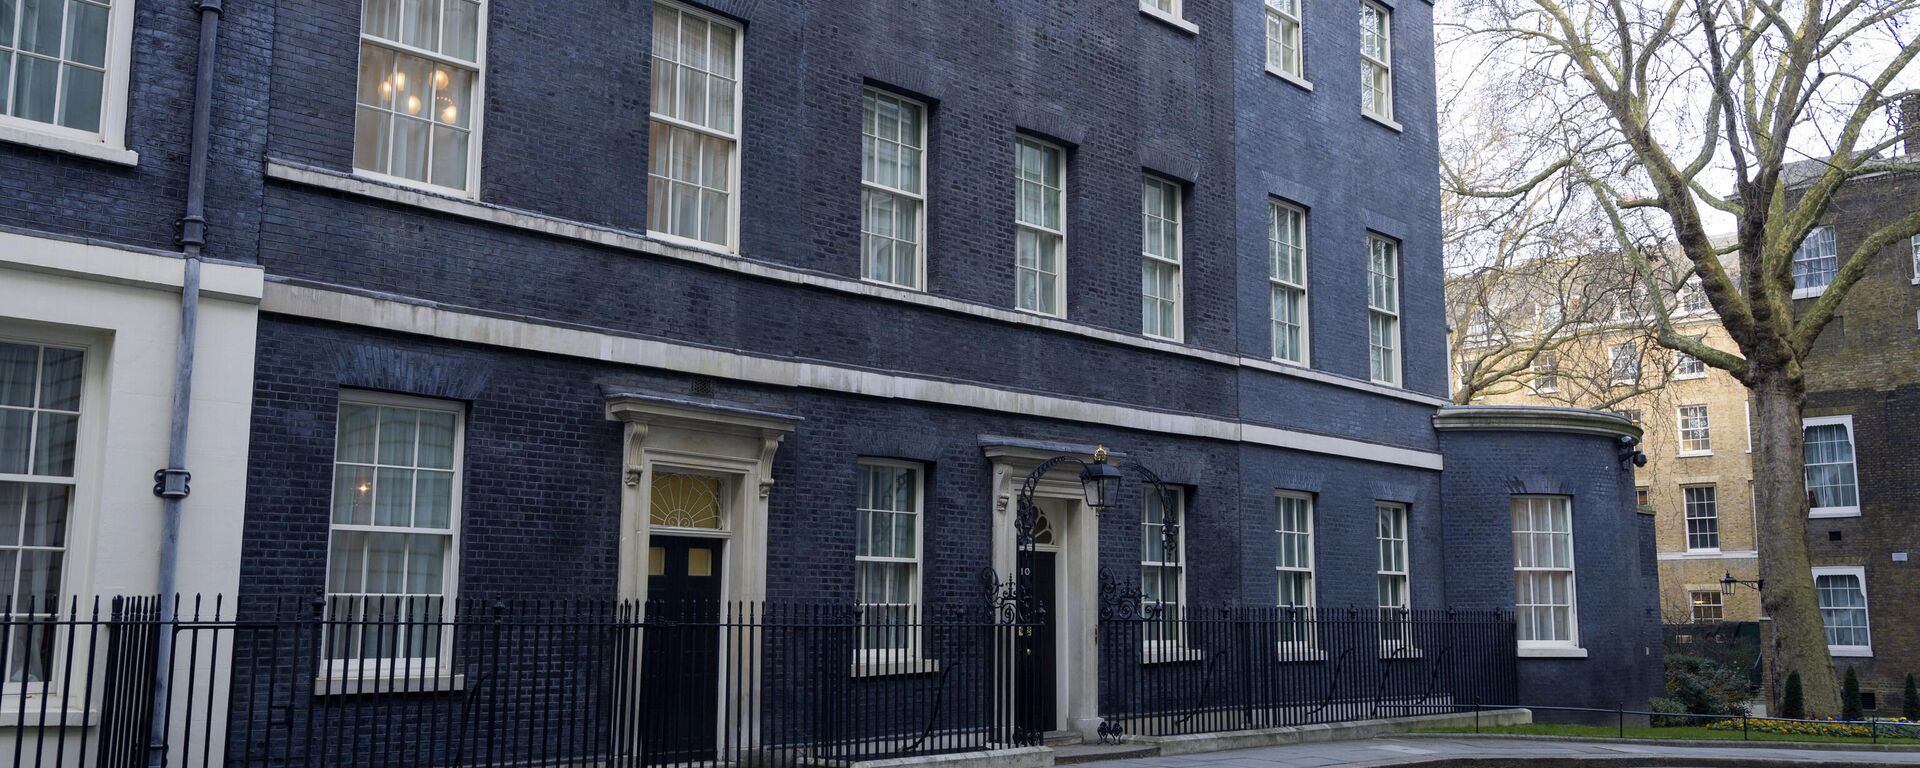 10 Downing Street is the official residence and the office of the British Prime Minister in London. - Sputnik International, 1920, 18.11.2023